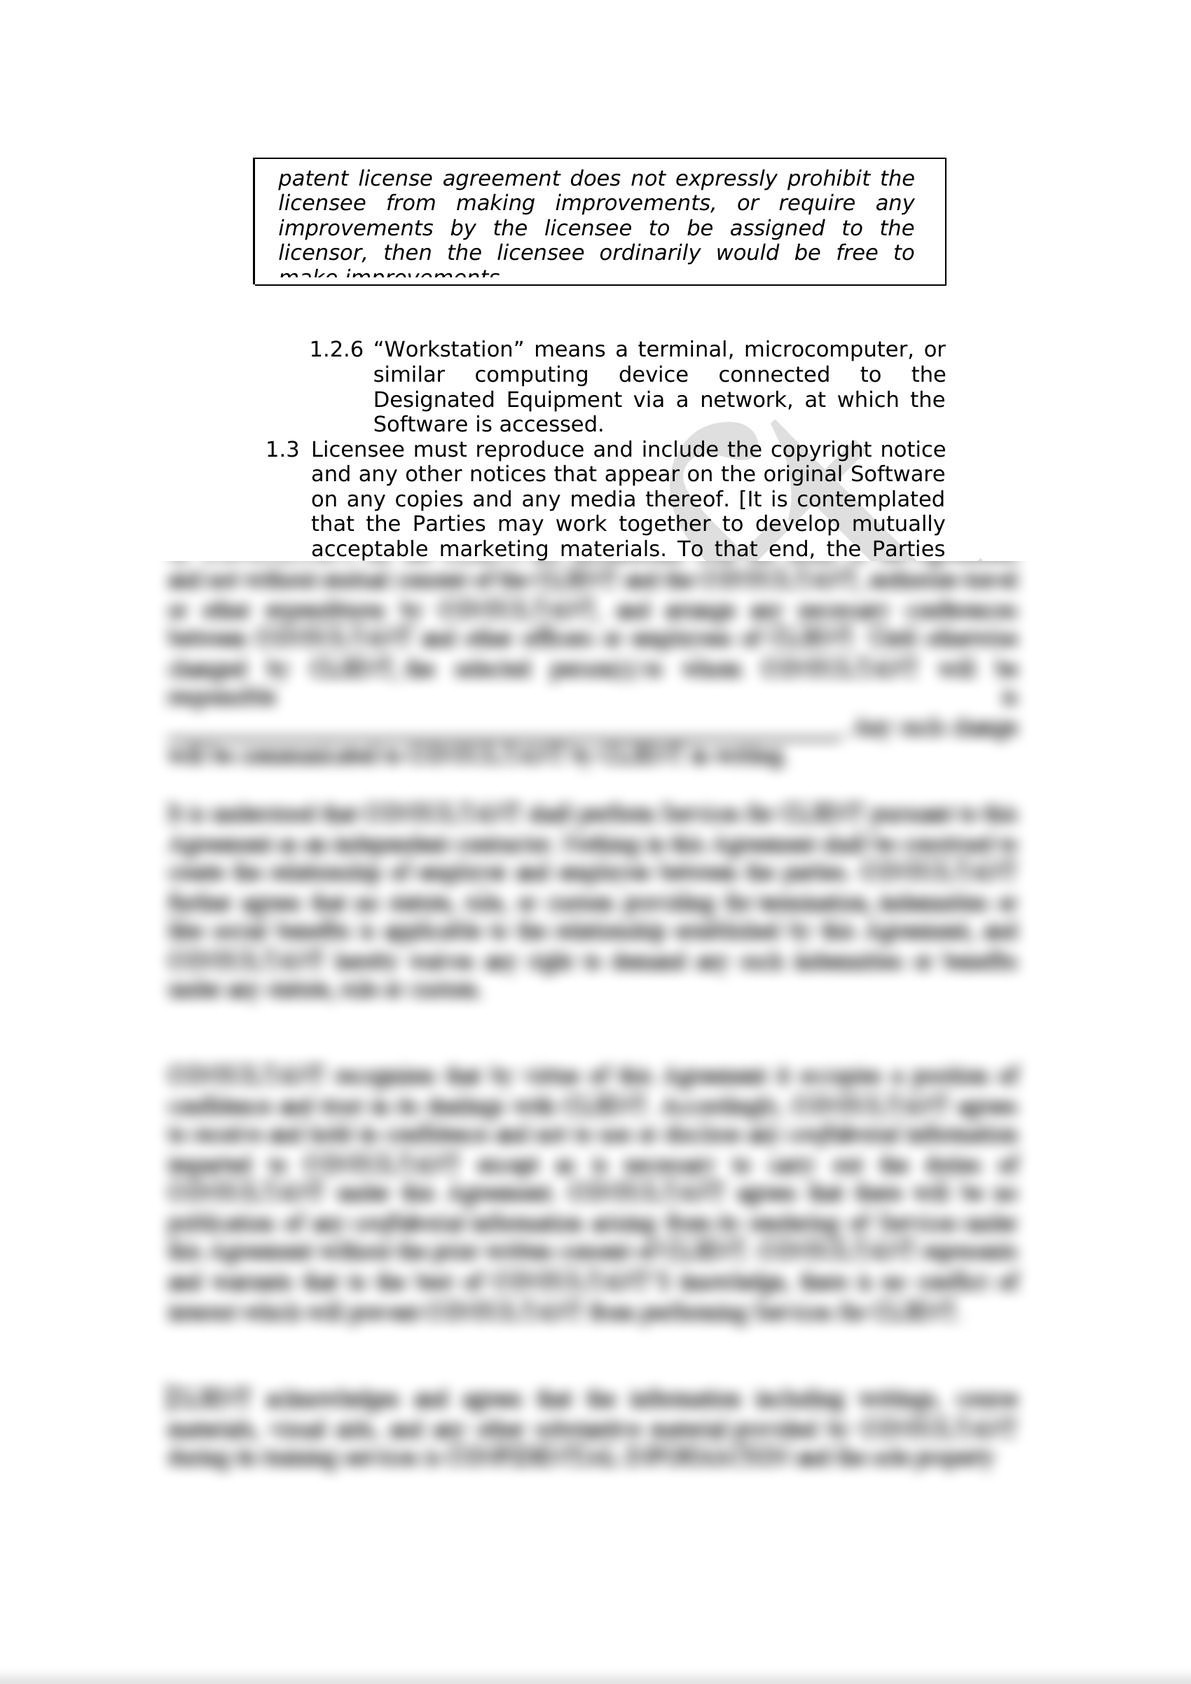 Software License Agreement-8